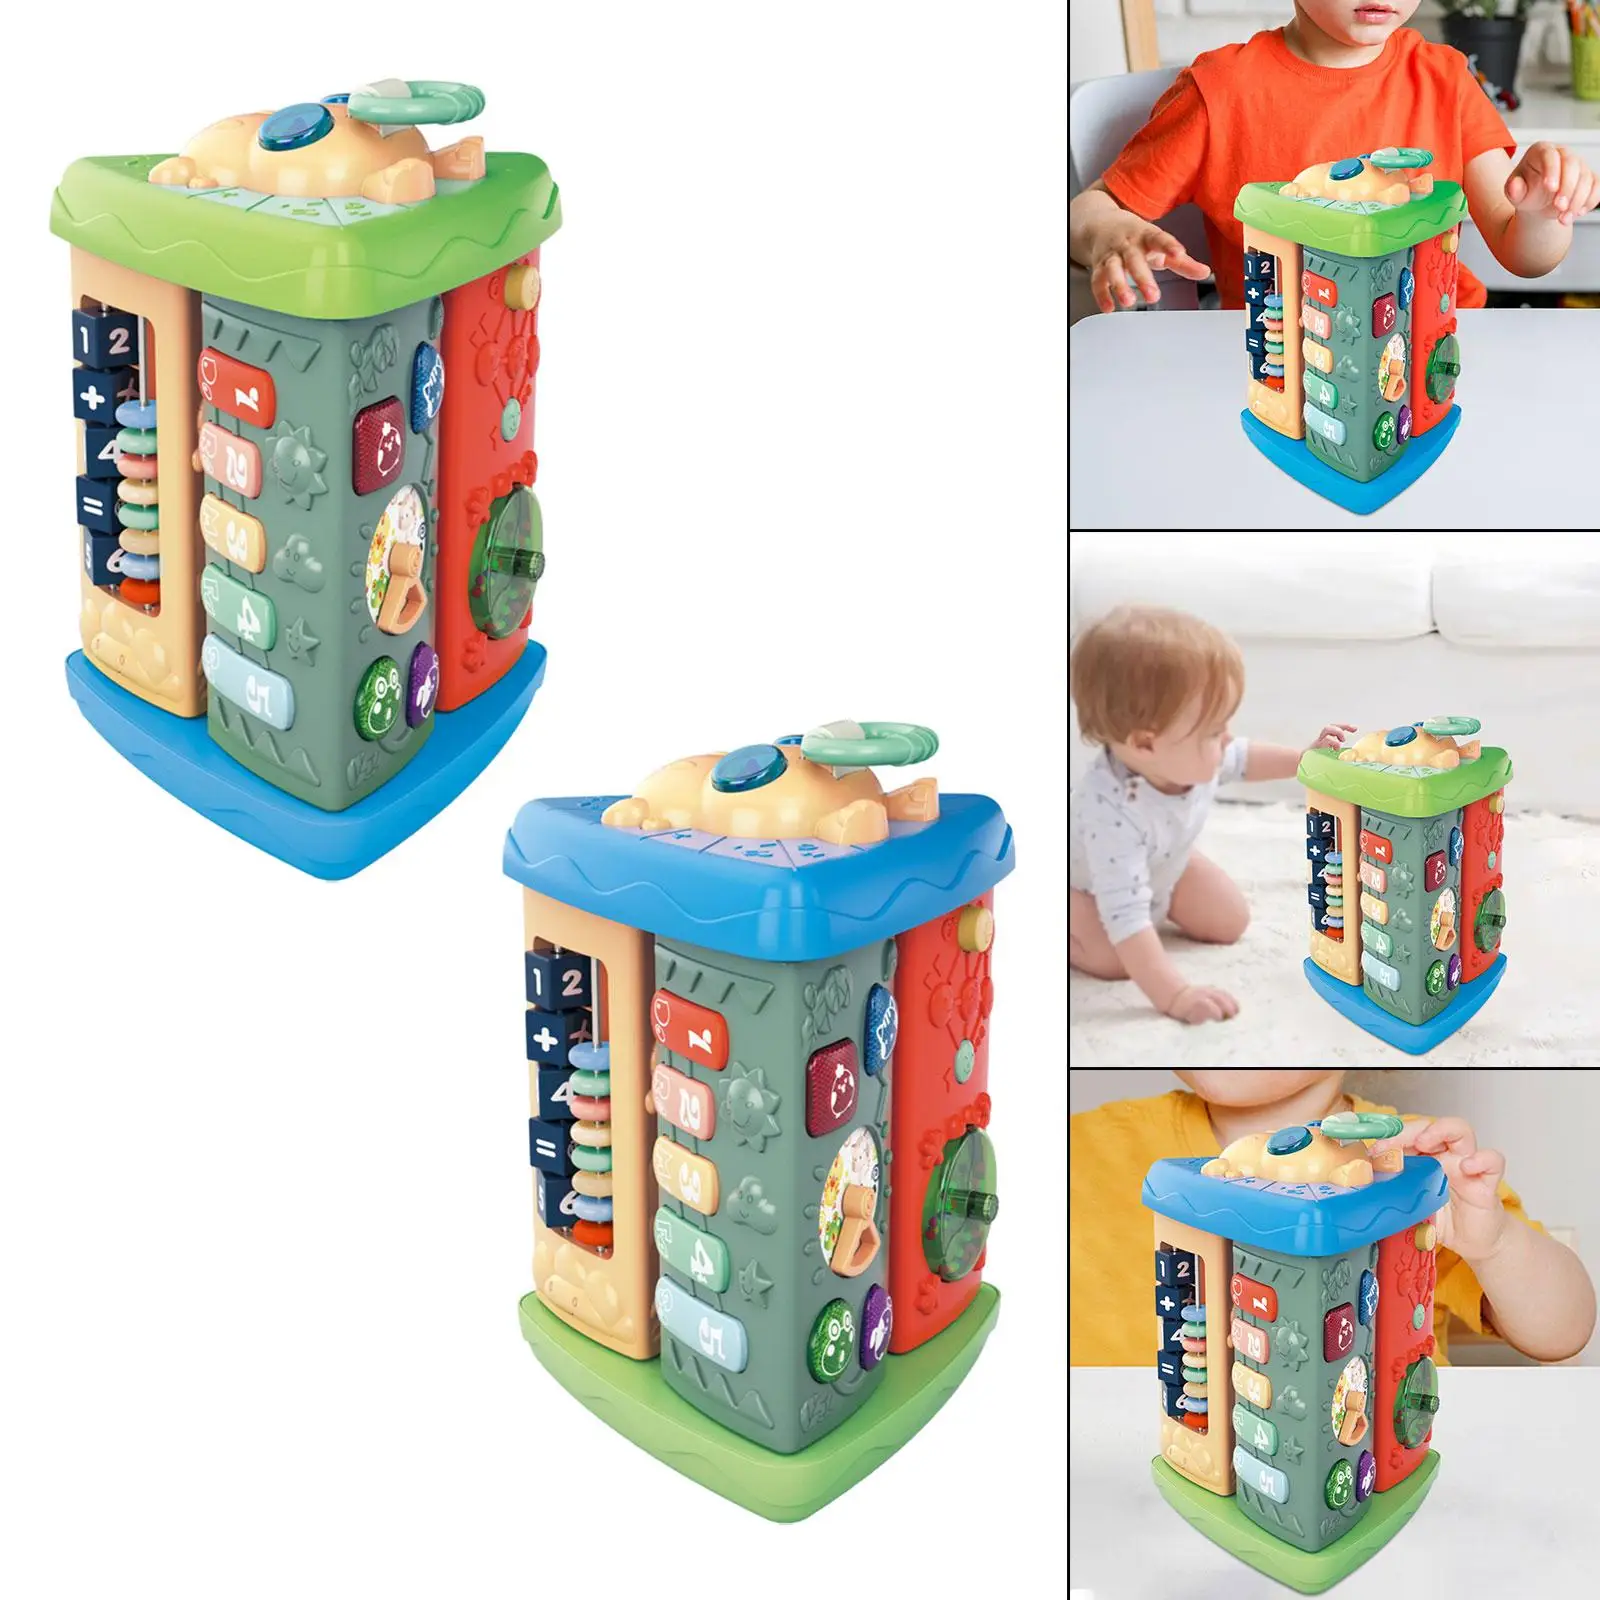 Musical Activity Toy Educational Learning Toy Sensory Sound Center for Boy Girls Toddlers Preschool Holiday Gifts